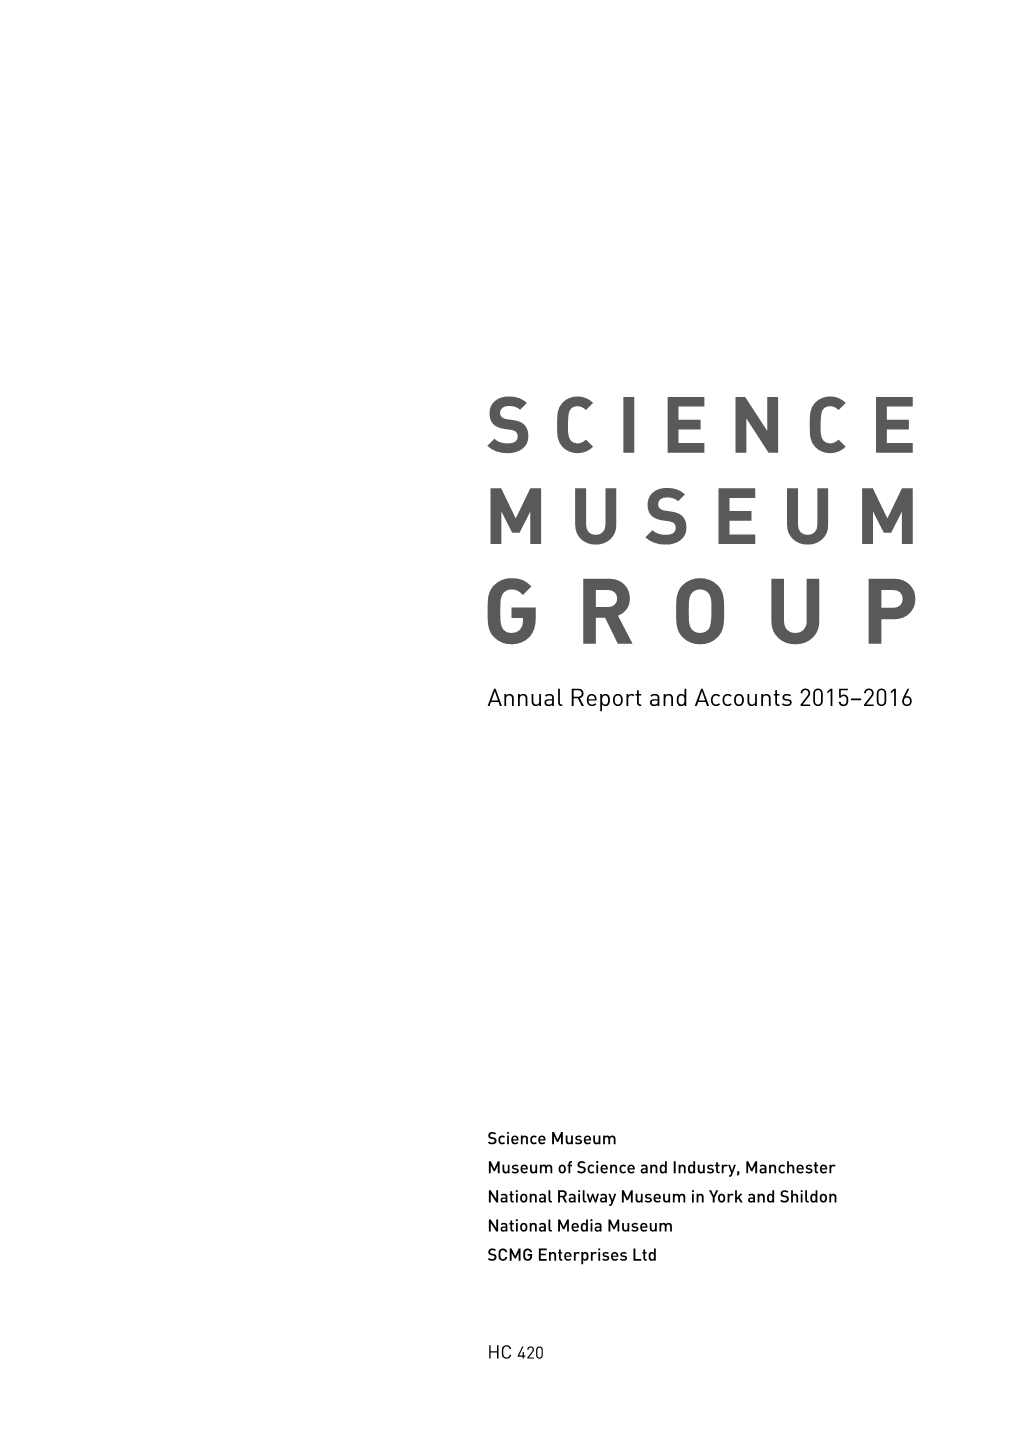 Science Museum Group Annual Report and Accounts